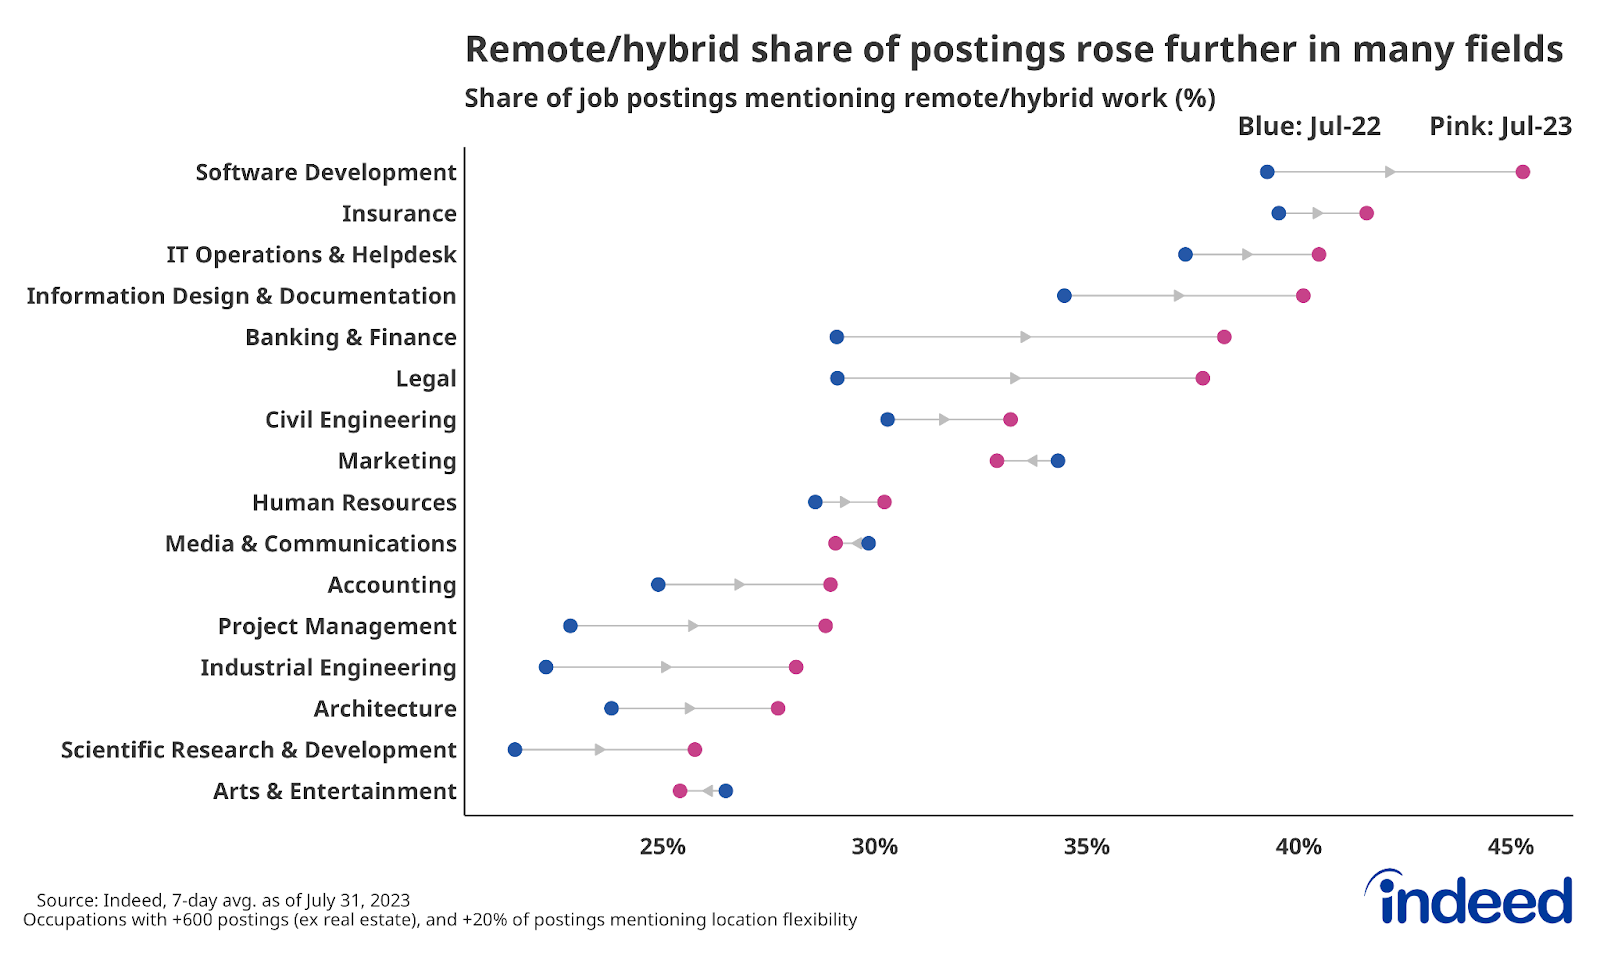 Row chart titled “Remote/hybrid share of postings rose further in many fields,” shows the share of Canadian job postings mentioning remote/hybrid-related terms by occupational sector, with blue dots the share on July-31, 2022, and pink dots the share on July-31, 2023. The share of postings mentioning location flexibility rose over the period across most remote-friendly fields.